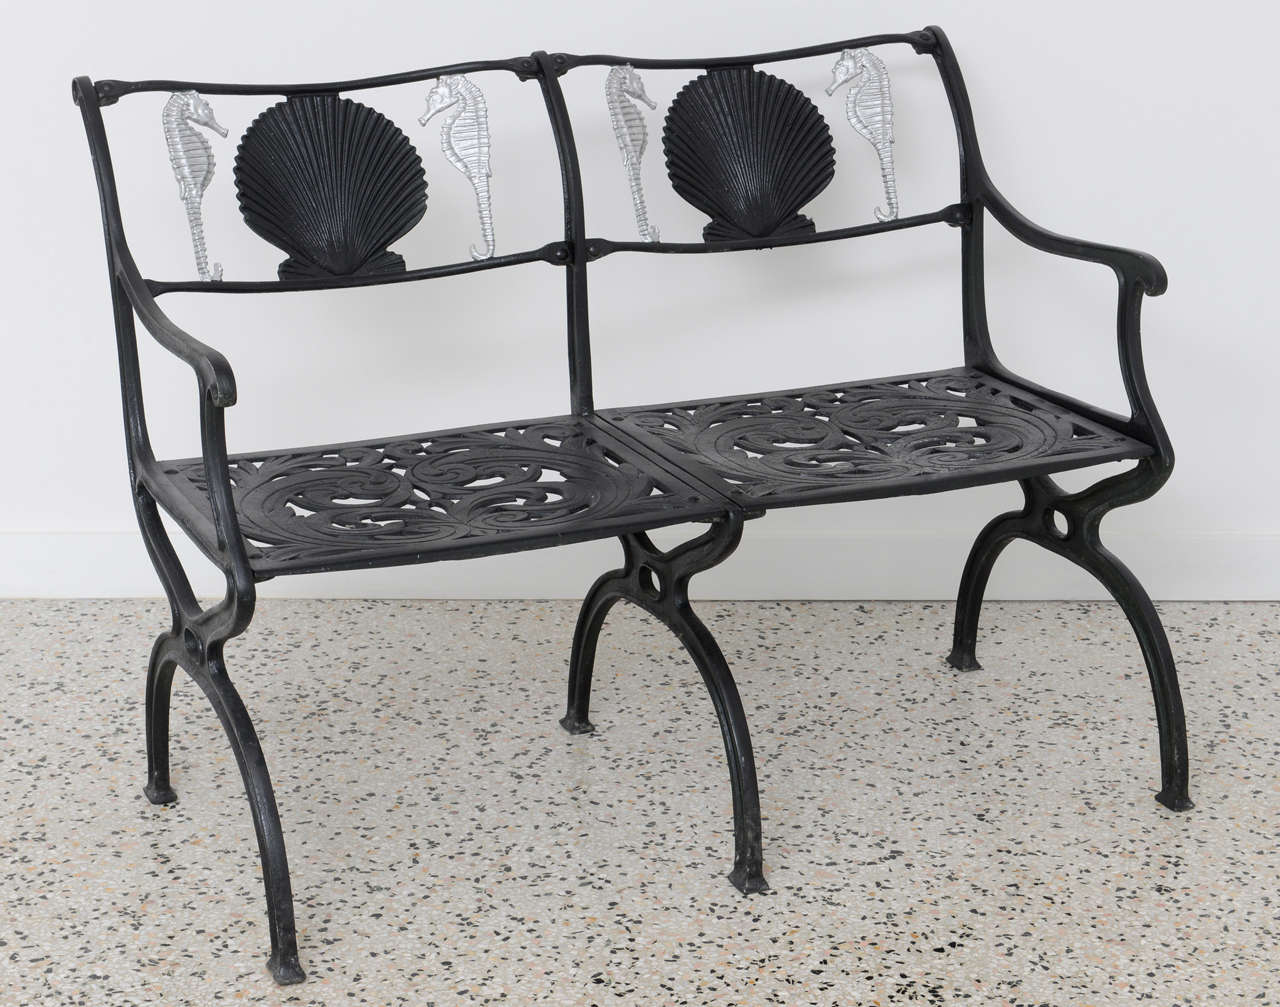 Molla cast aluminum painted black garden bench with a shell and painted silver seahorse motif. Two benches available but priced individually.  Pair of armchairs also available, contact dealer for photos and information.

Please feel free to